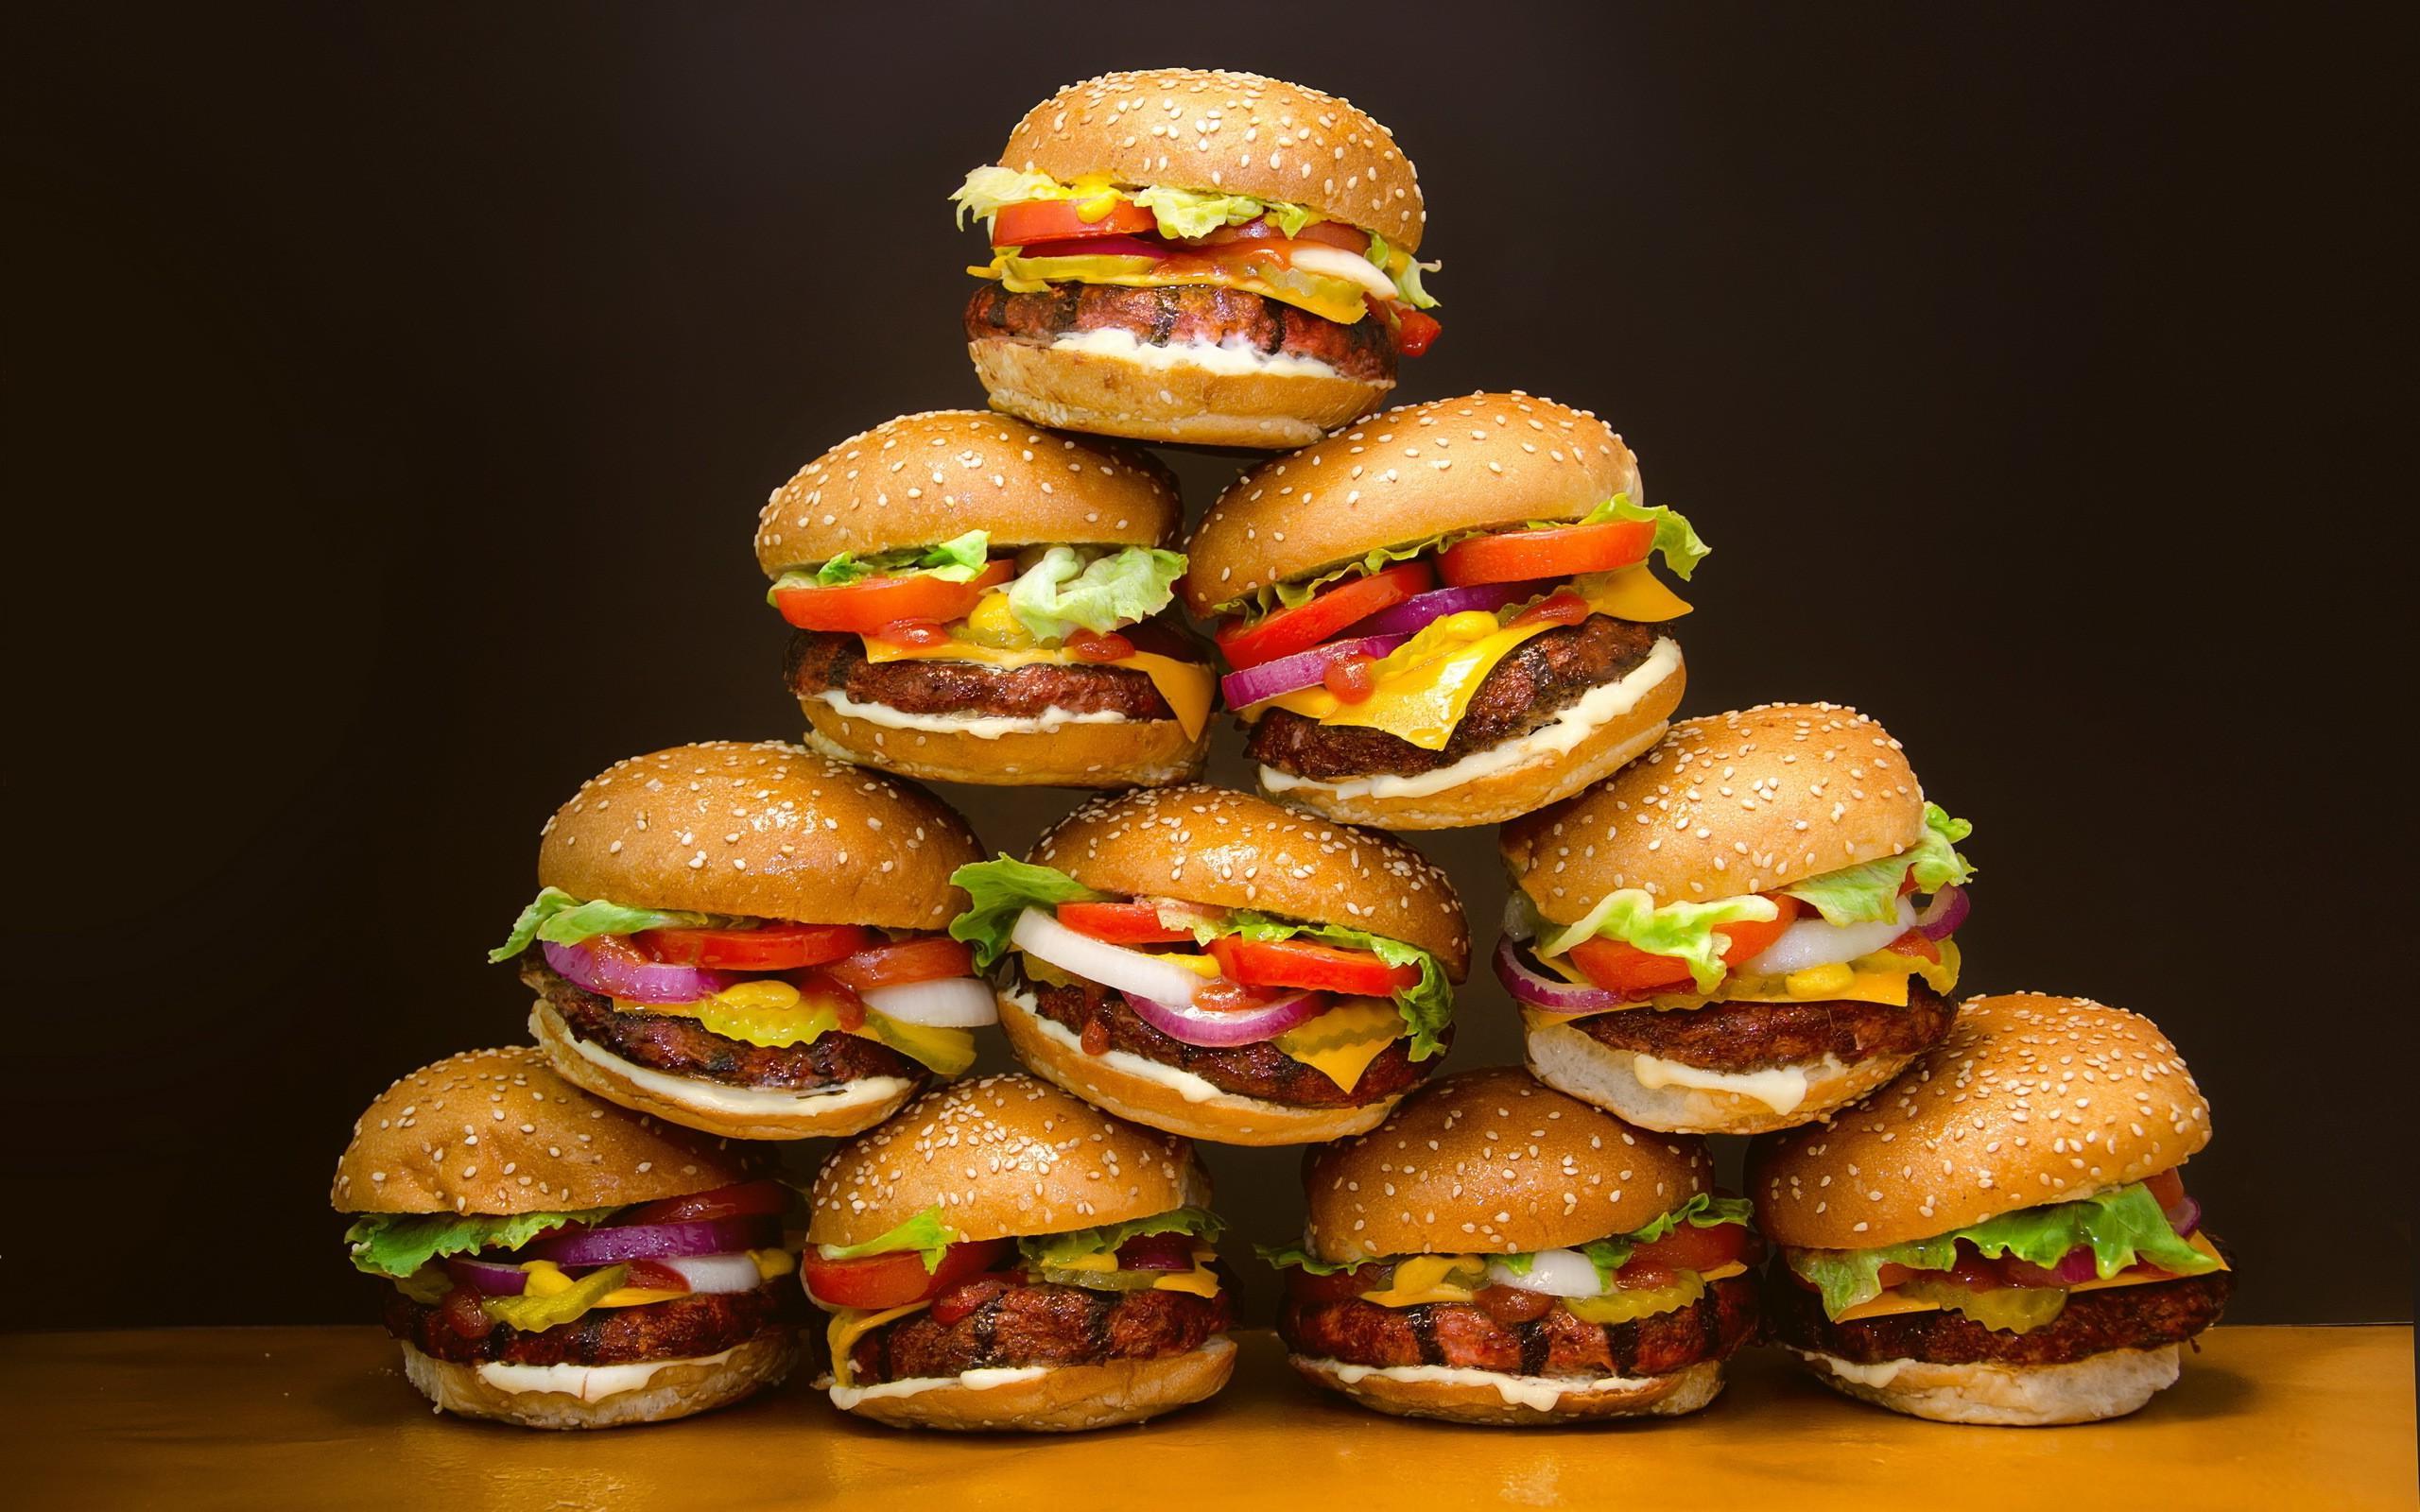 mcdonalds cheeseburger images PNG & clipart images | Citypng